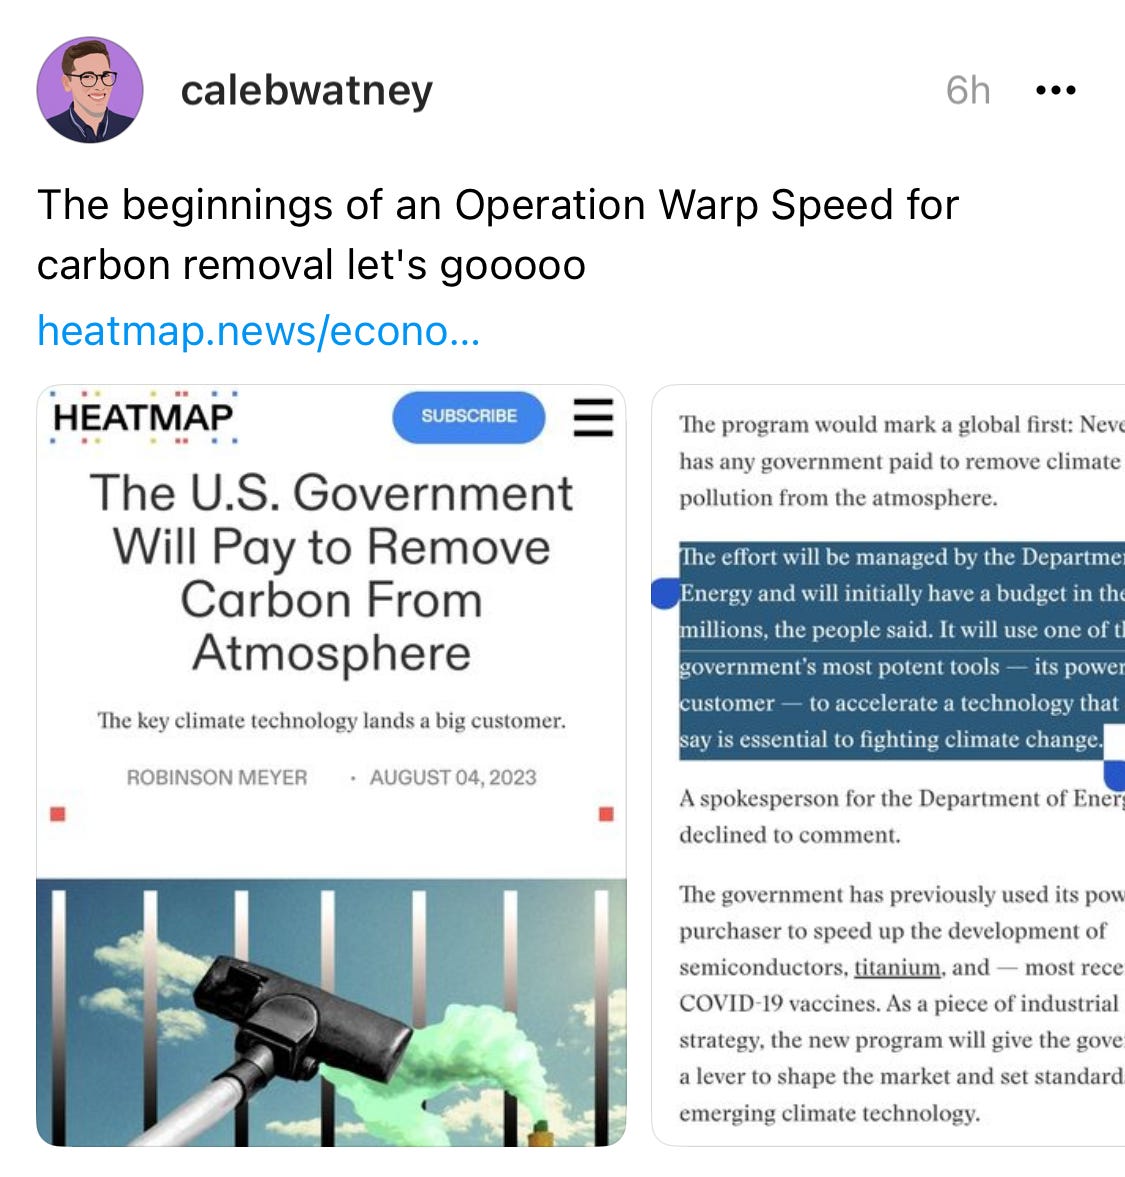 The beginnings of an Operation Warp Speed for carbon removal let's gooooo heatmap.news/econo…